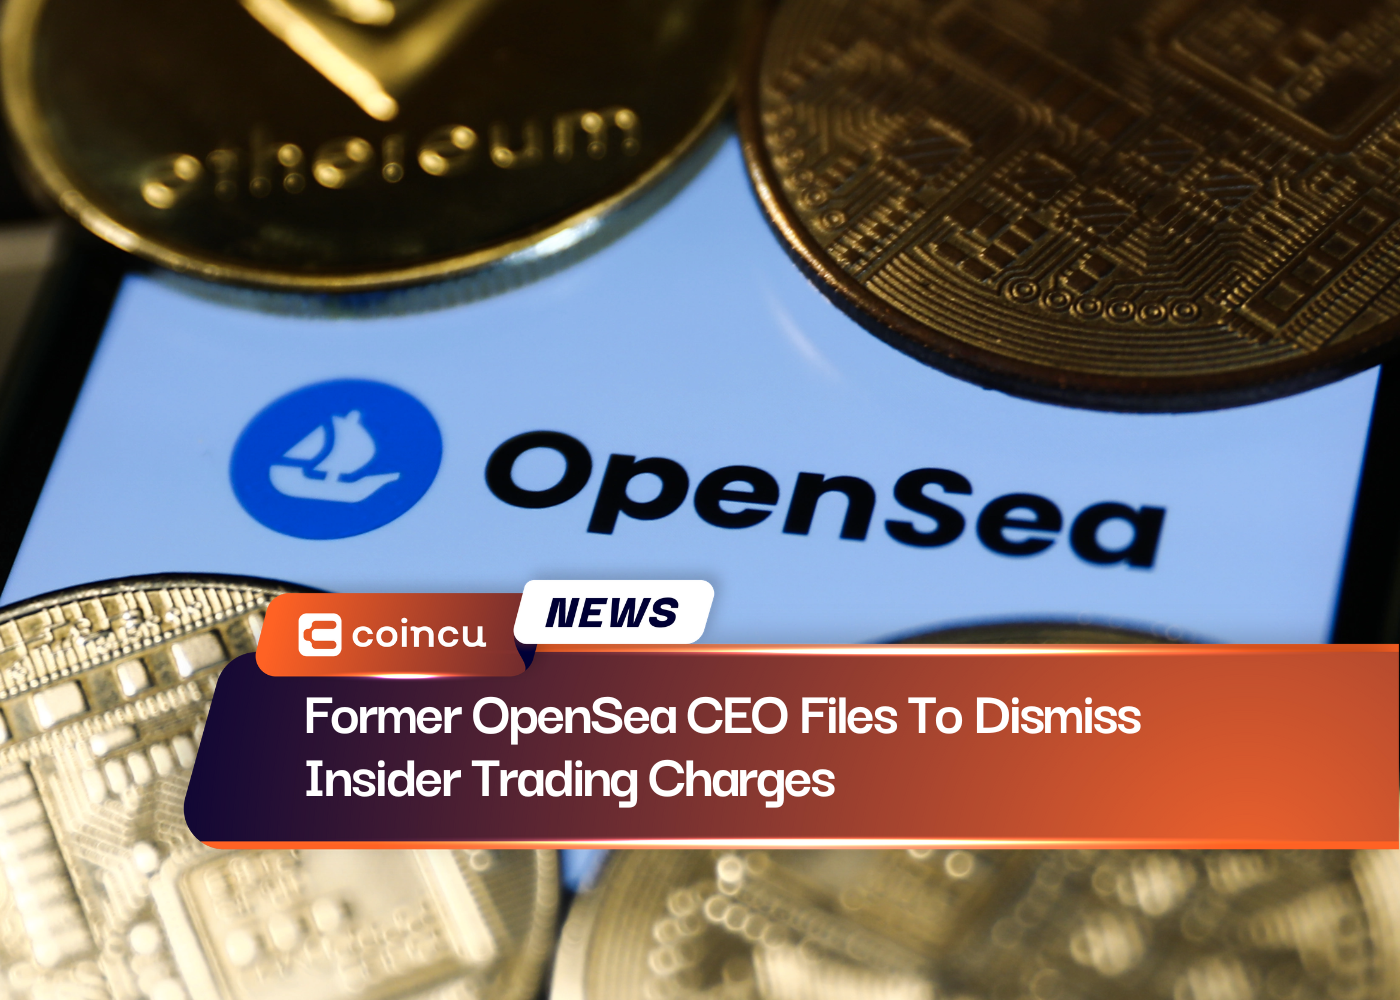 Former OpenSea CEO Files To Dismiss Insider Trading Charges